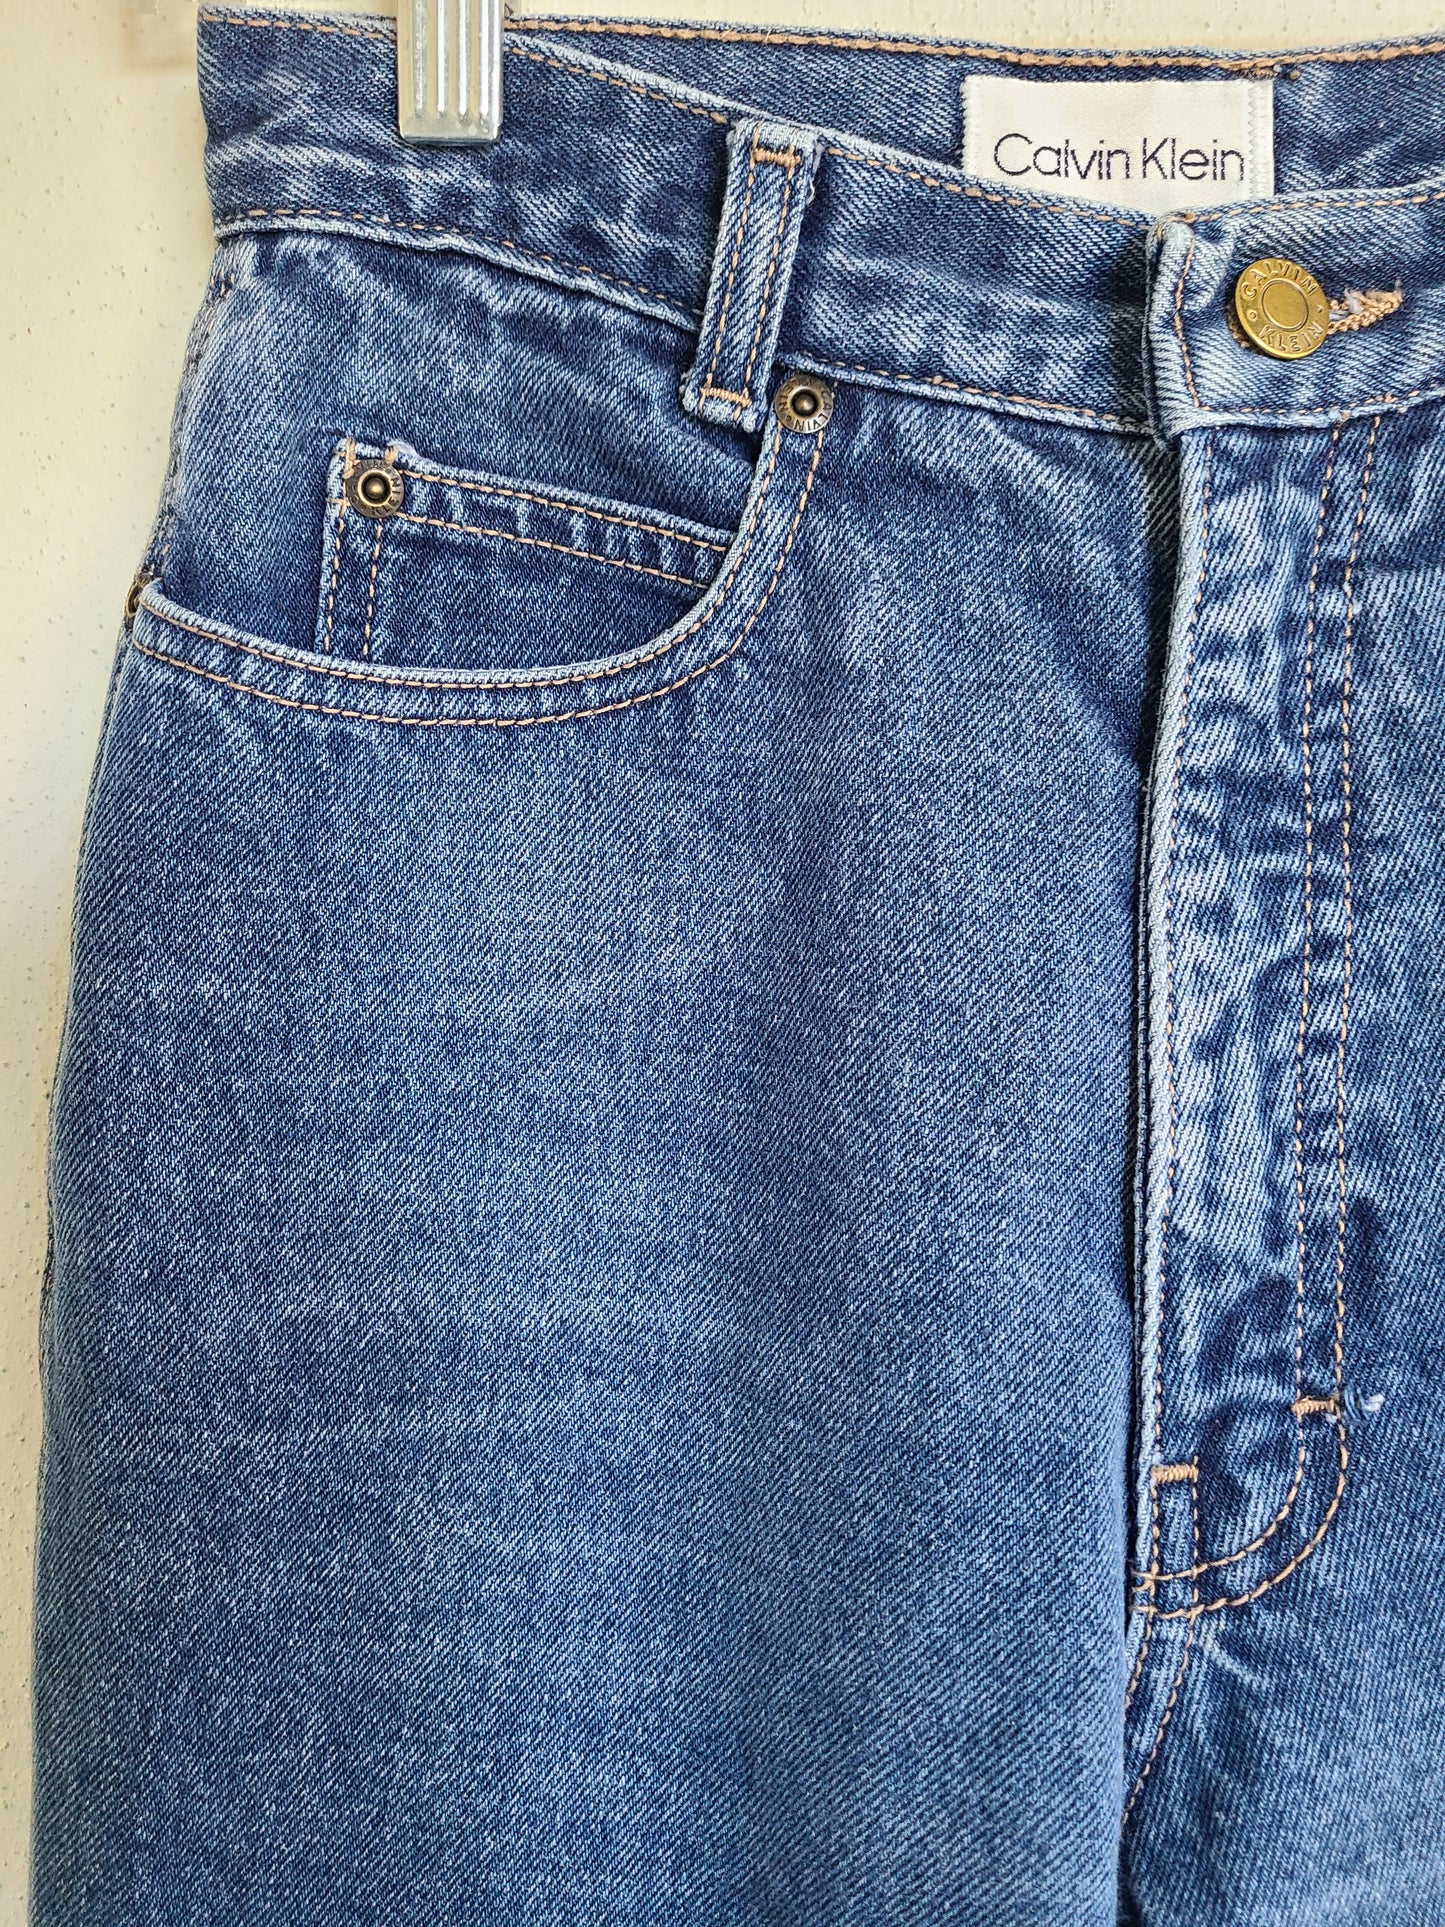 The 90s Does 70s Vintage Calvin Klein Straight Leg Jeans 24-25 x 33